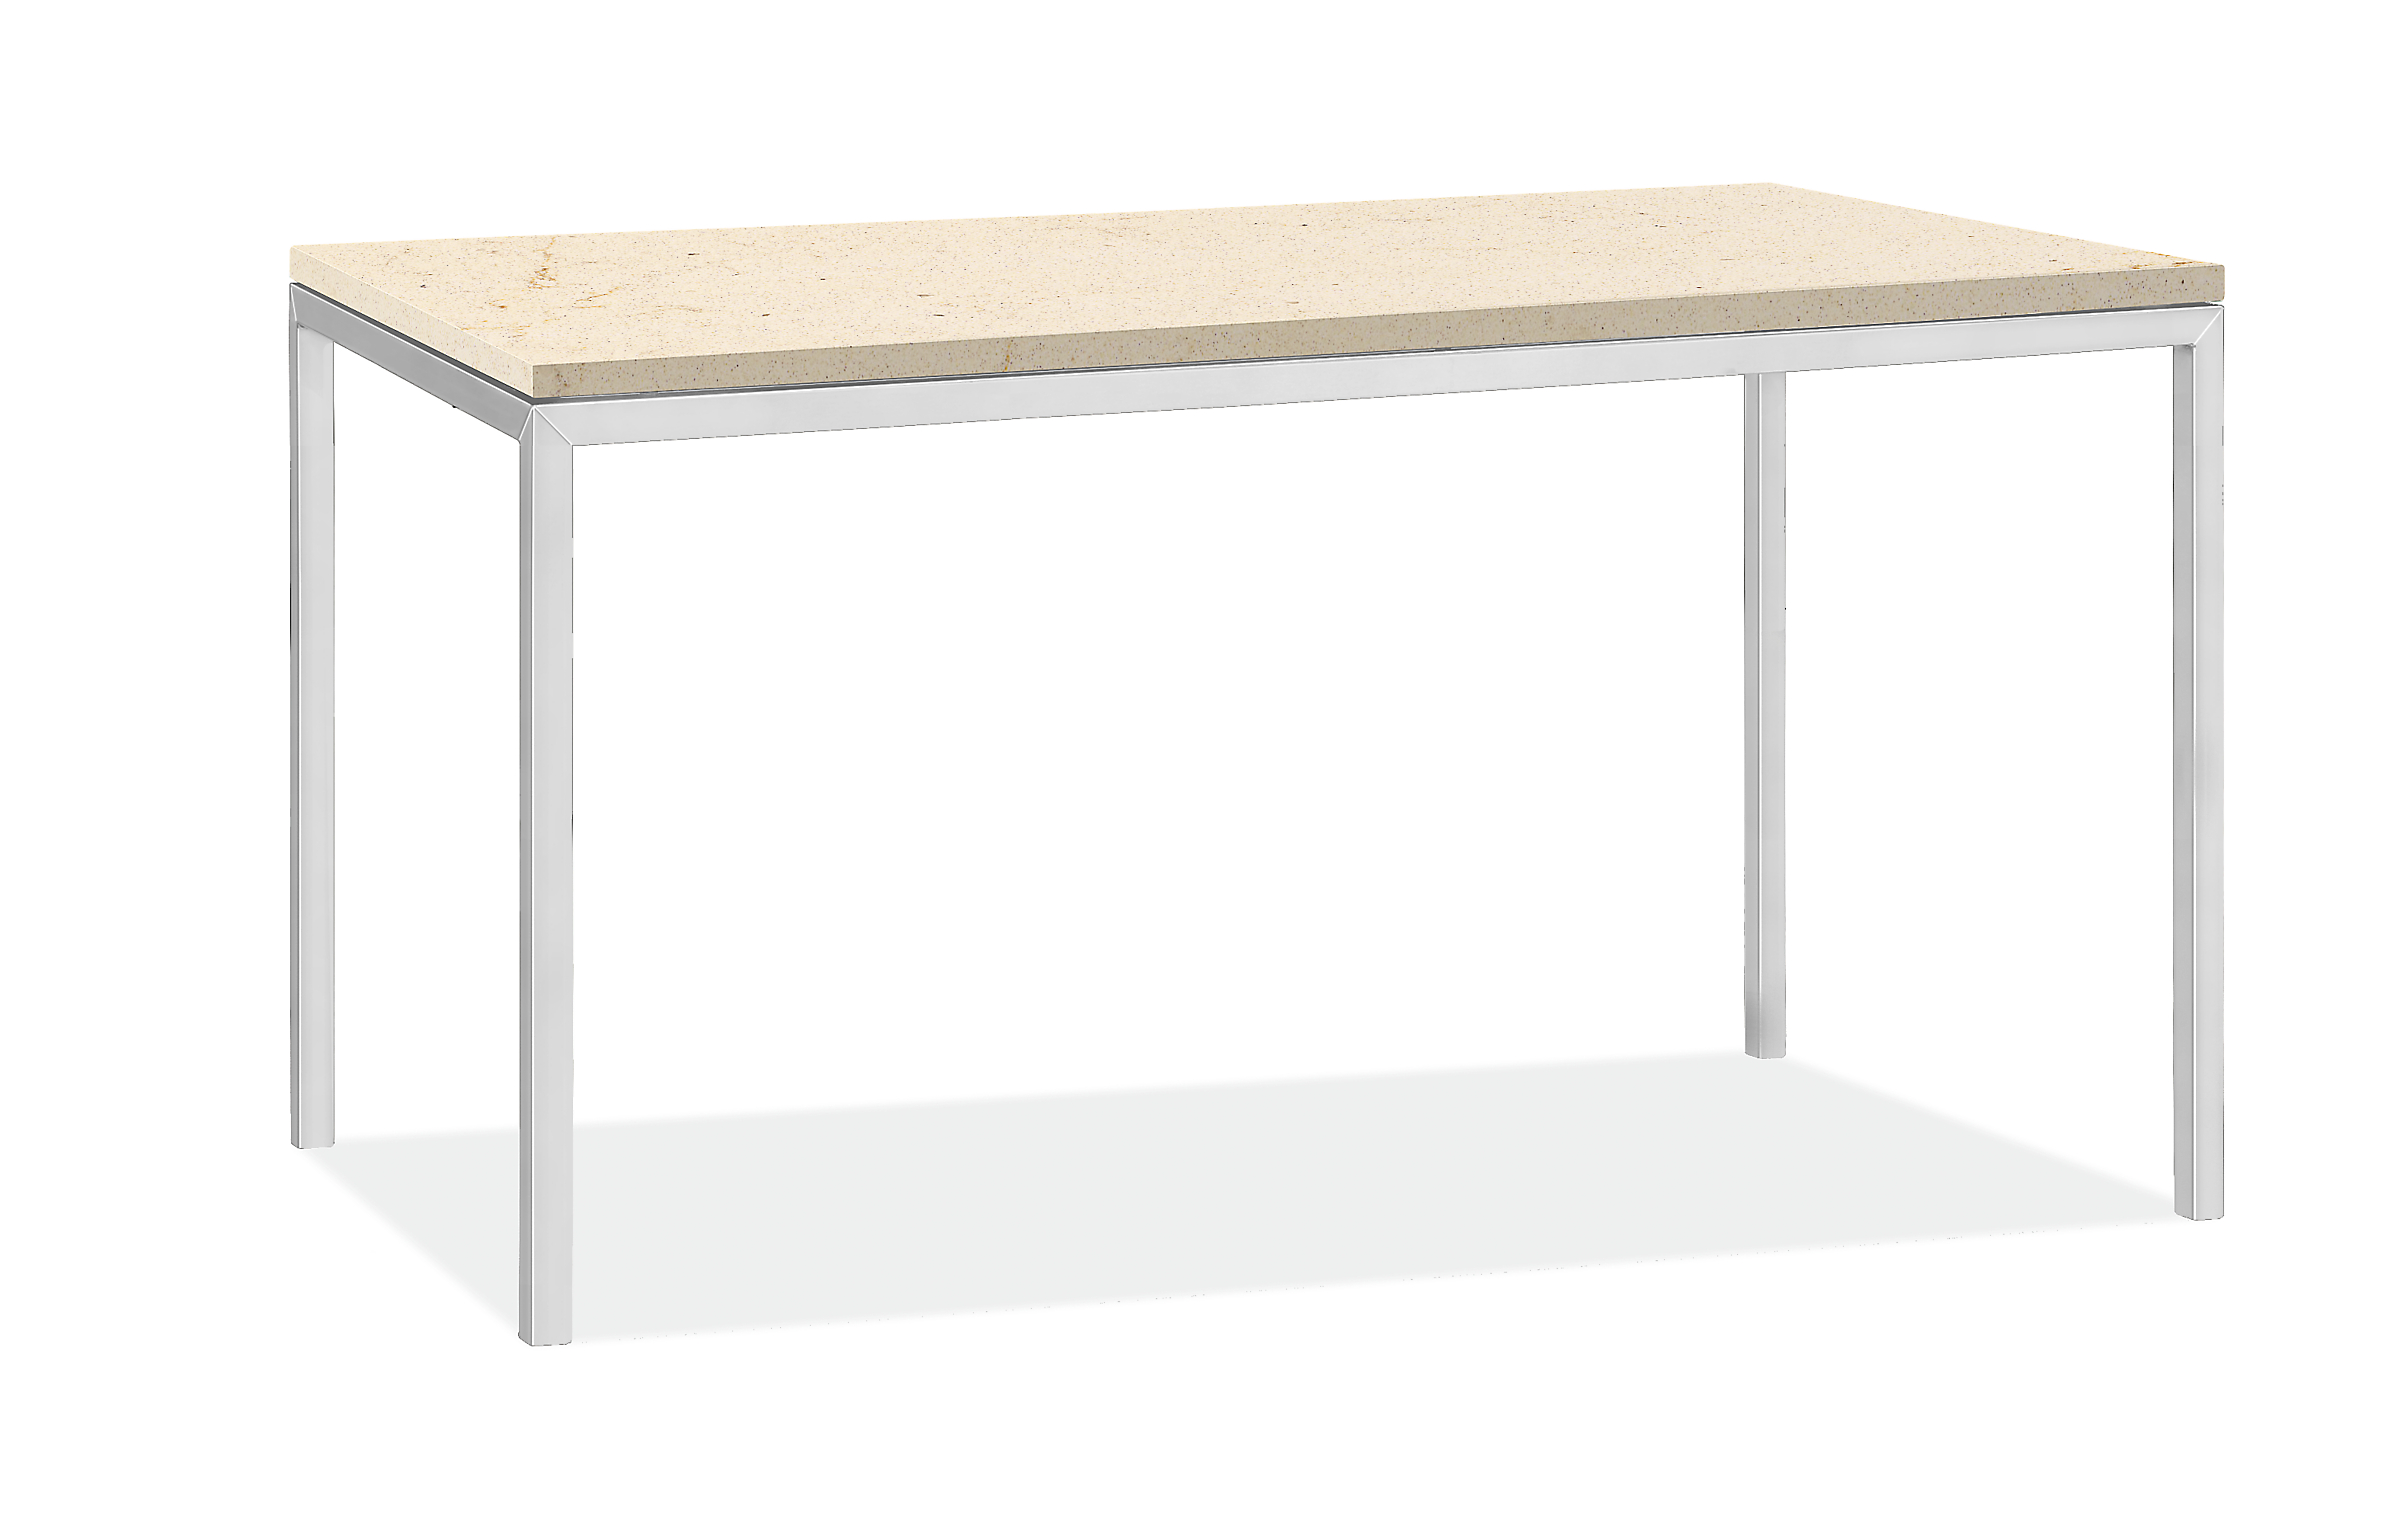 Parsons 54w 24d 36h Counter Table in 1" Stainless Steel with Ecru Quartz Top